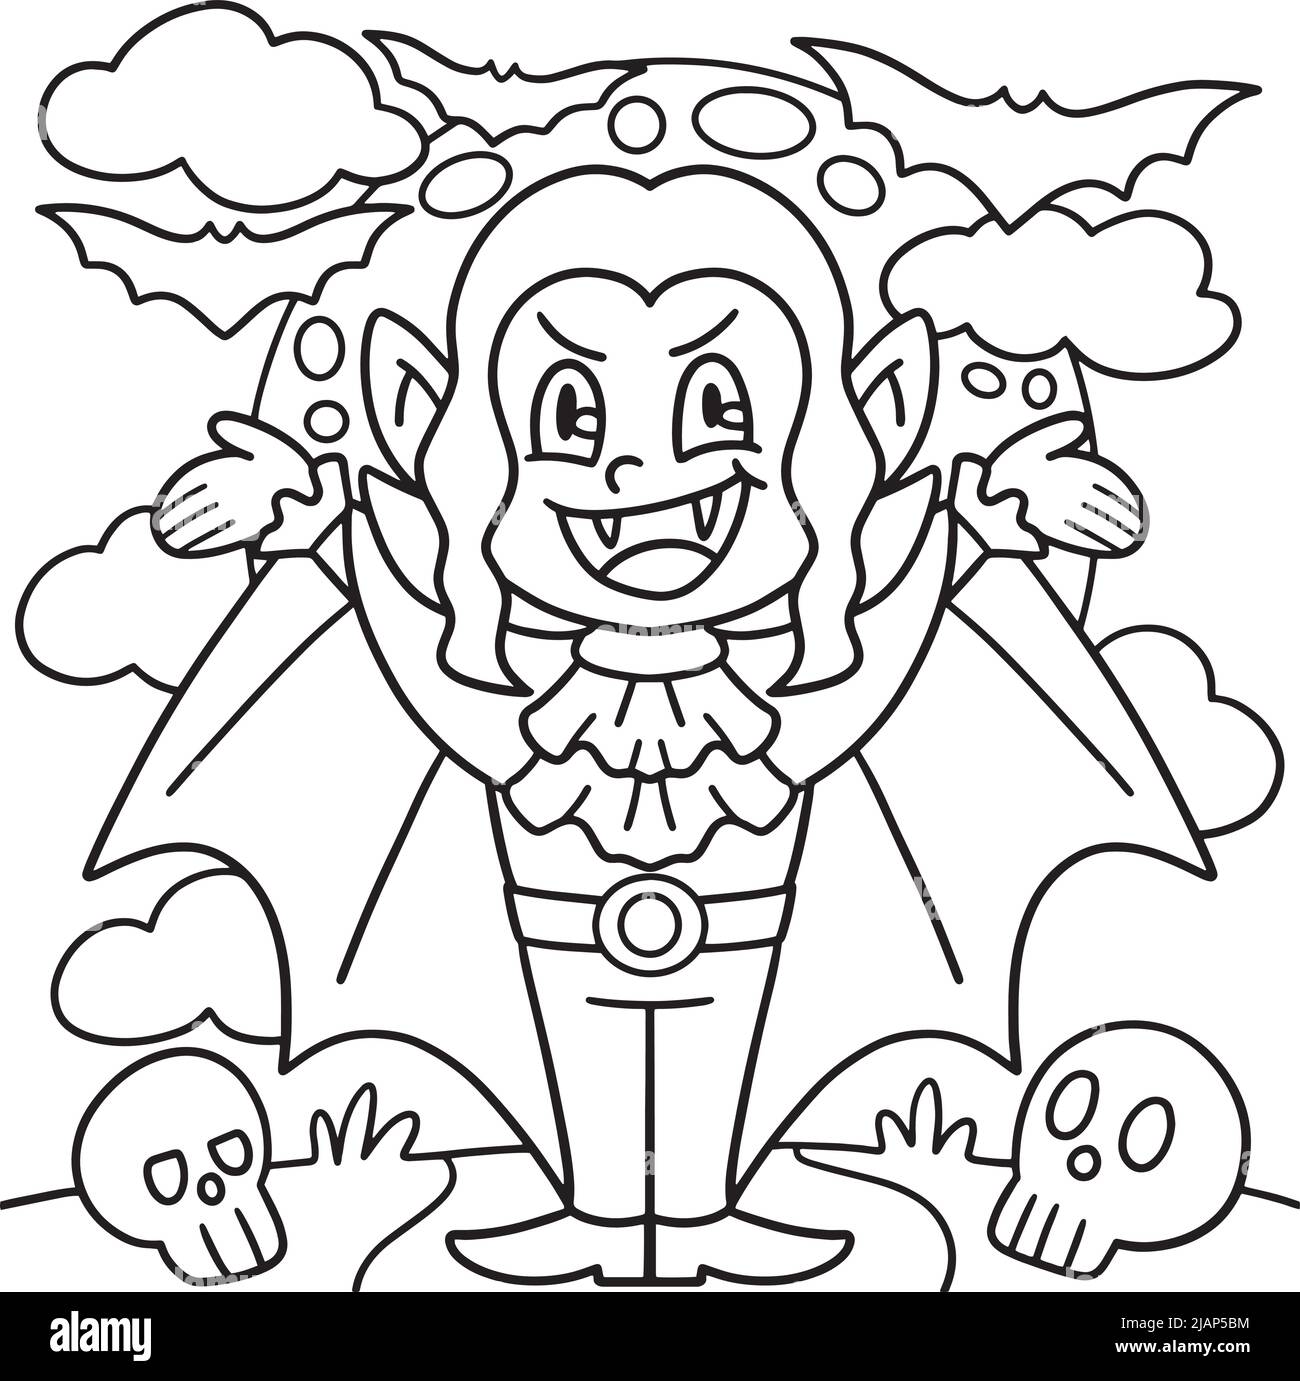 Girl vampire halloween coloring page for kids stock vector image art